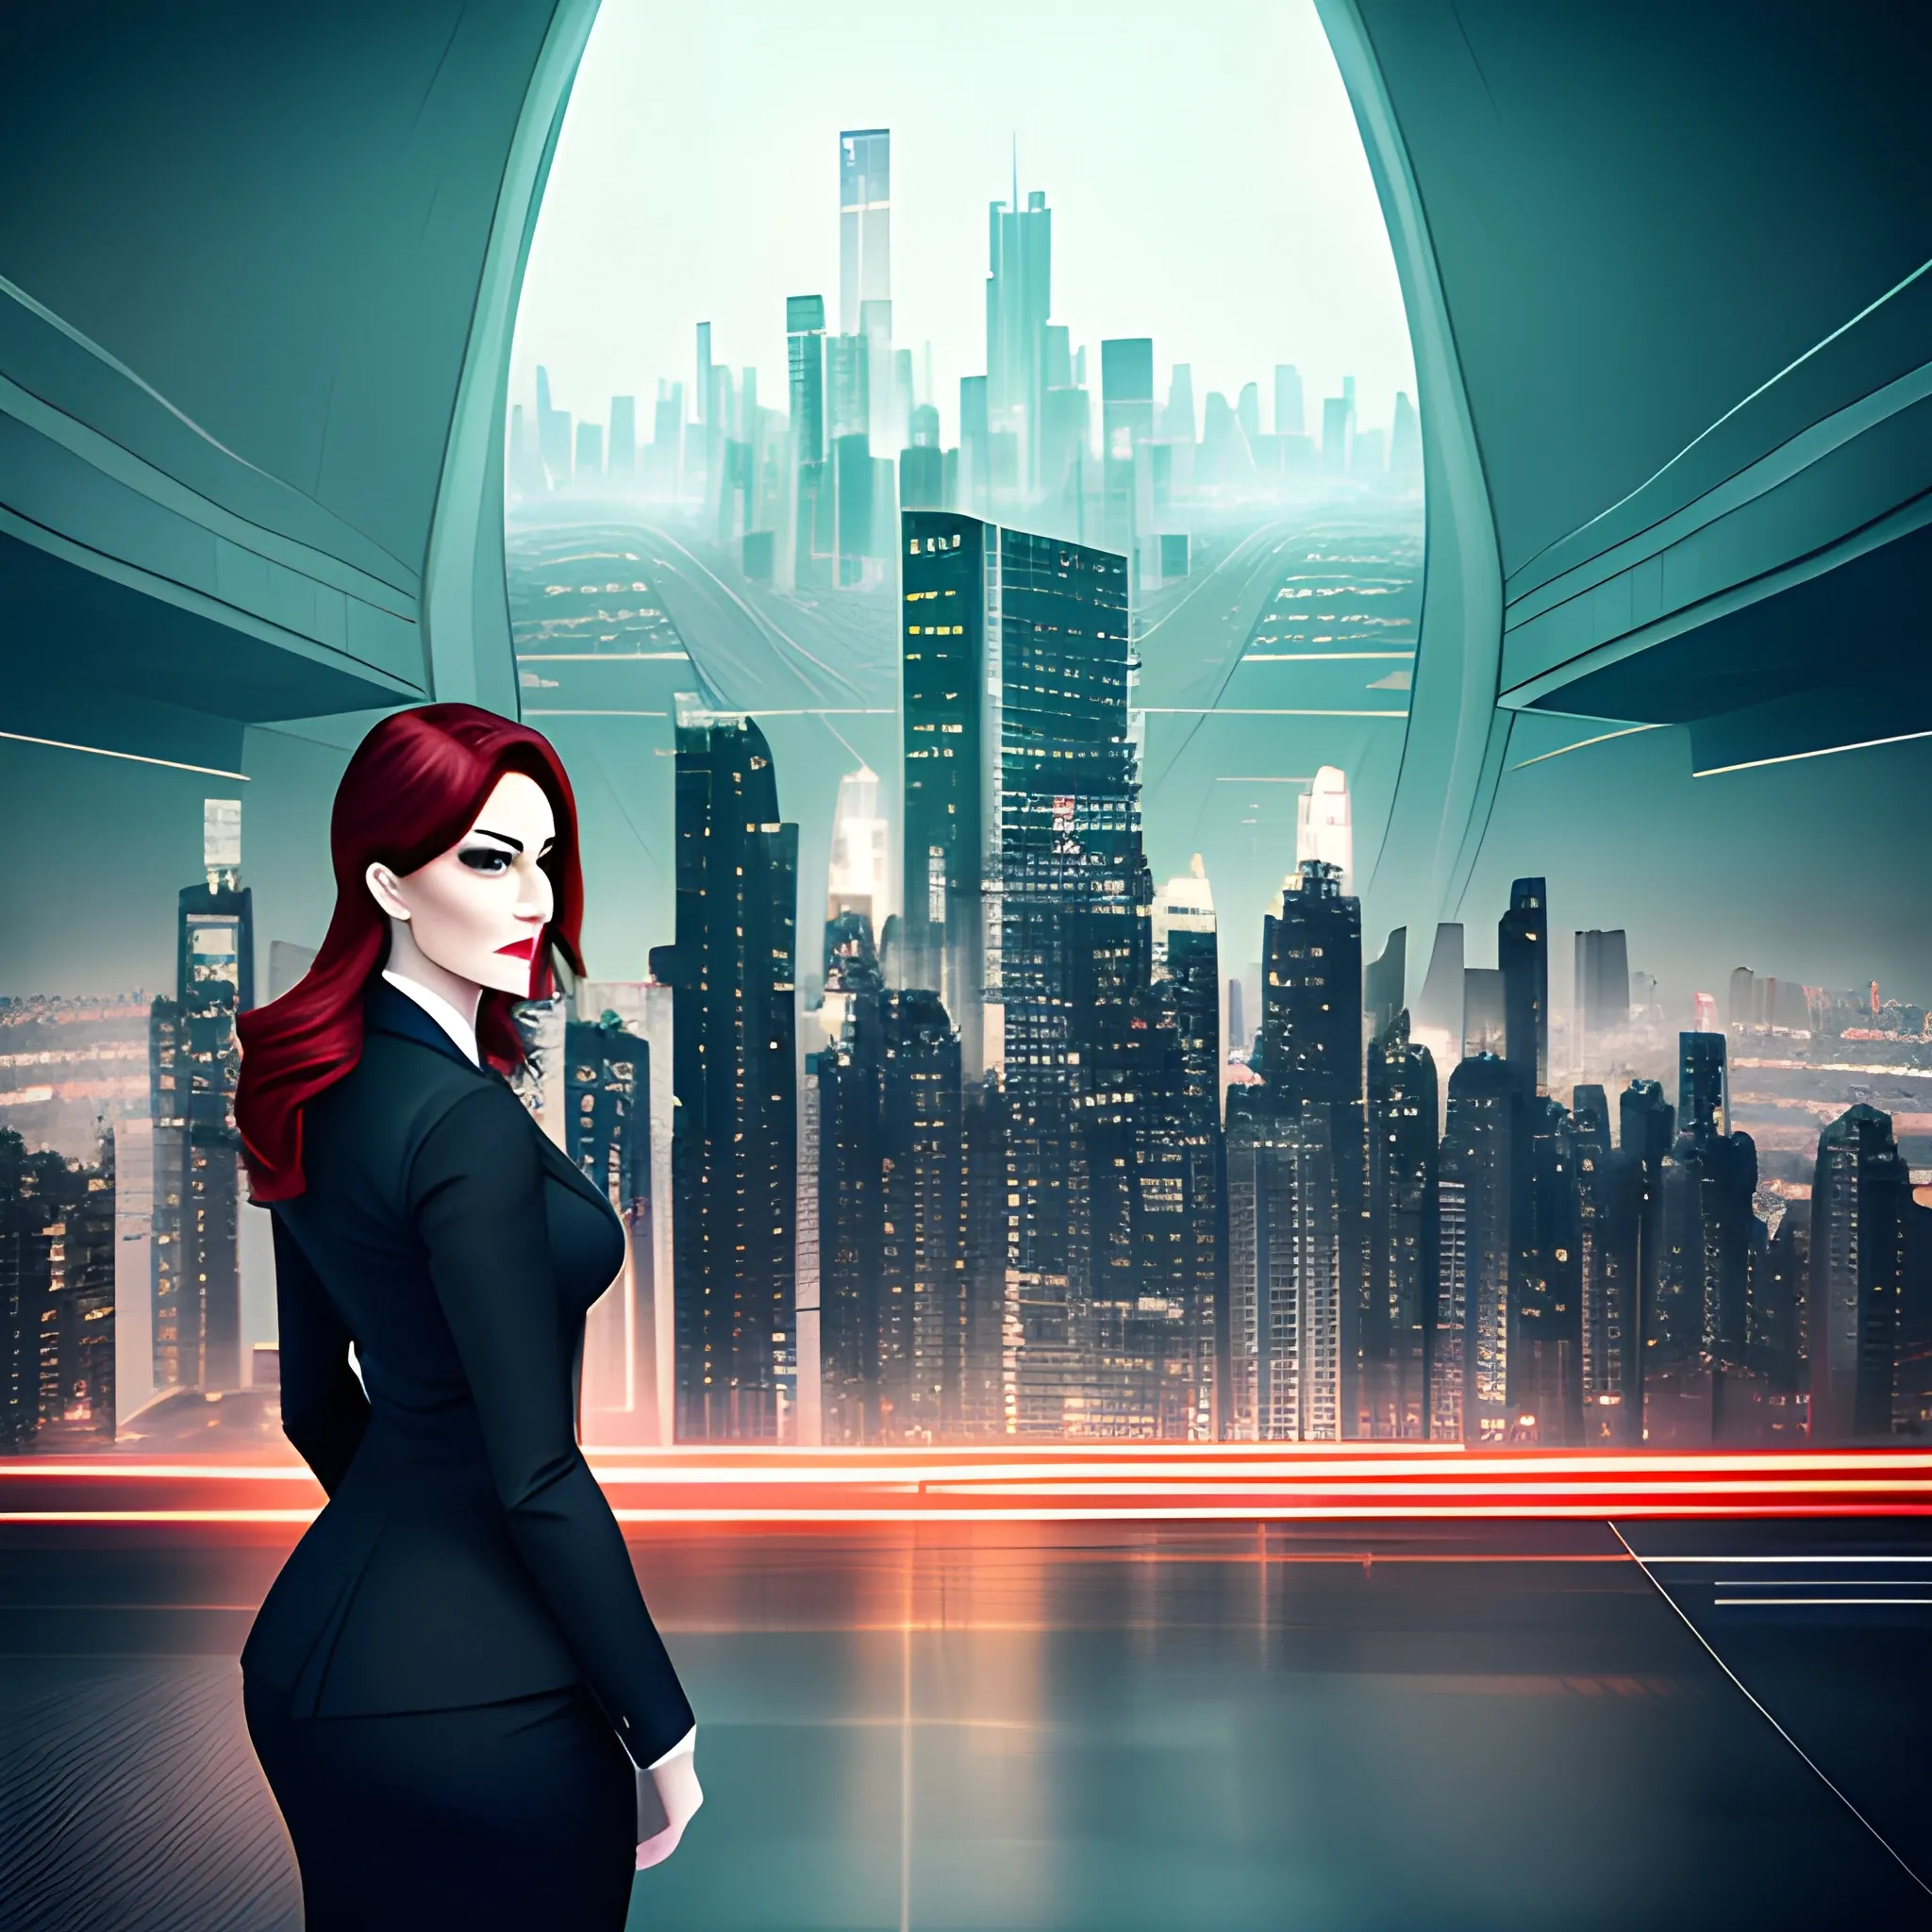 Create a stylized portrait of an entrepreneur girl against a city skyline. Use dramatic lighting and post-processing techniques to create a futuristic look.